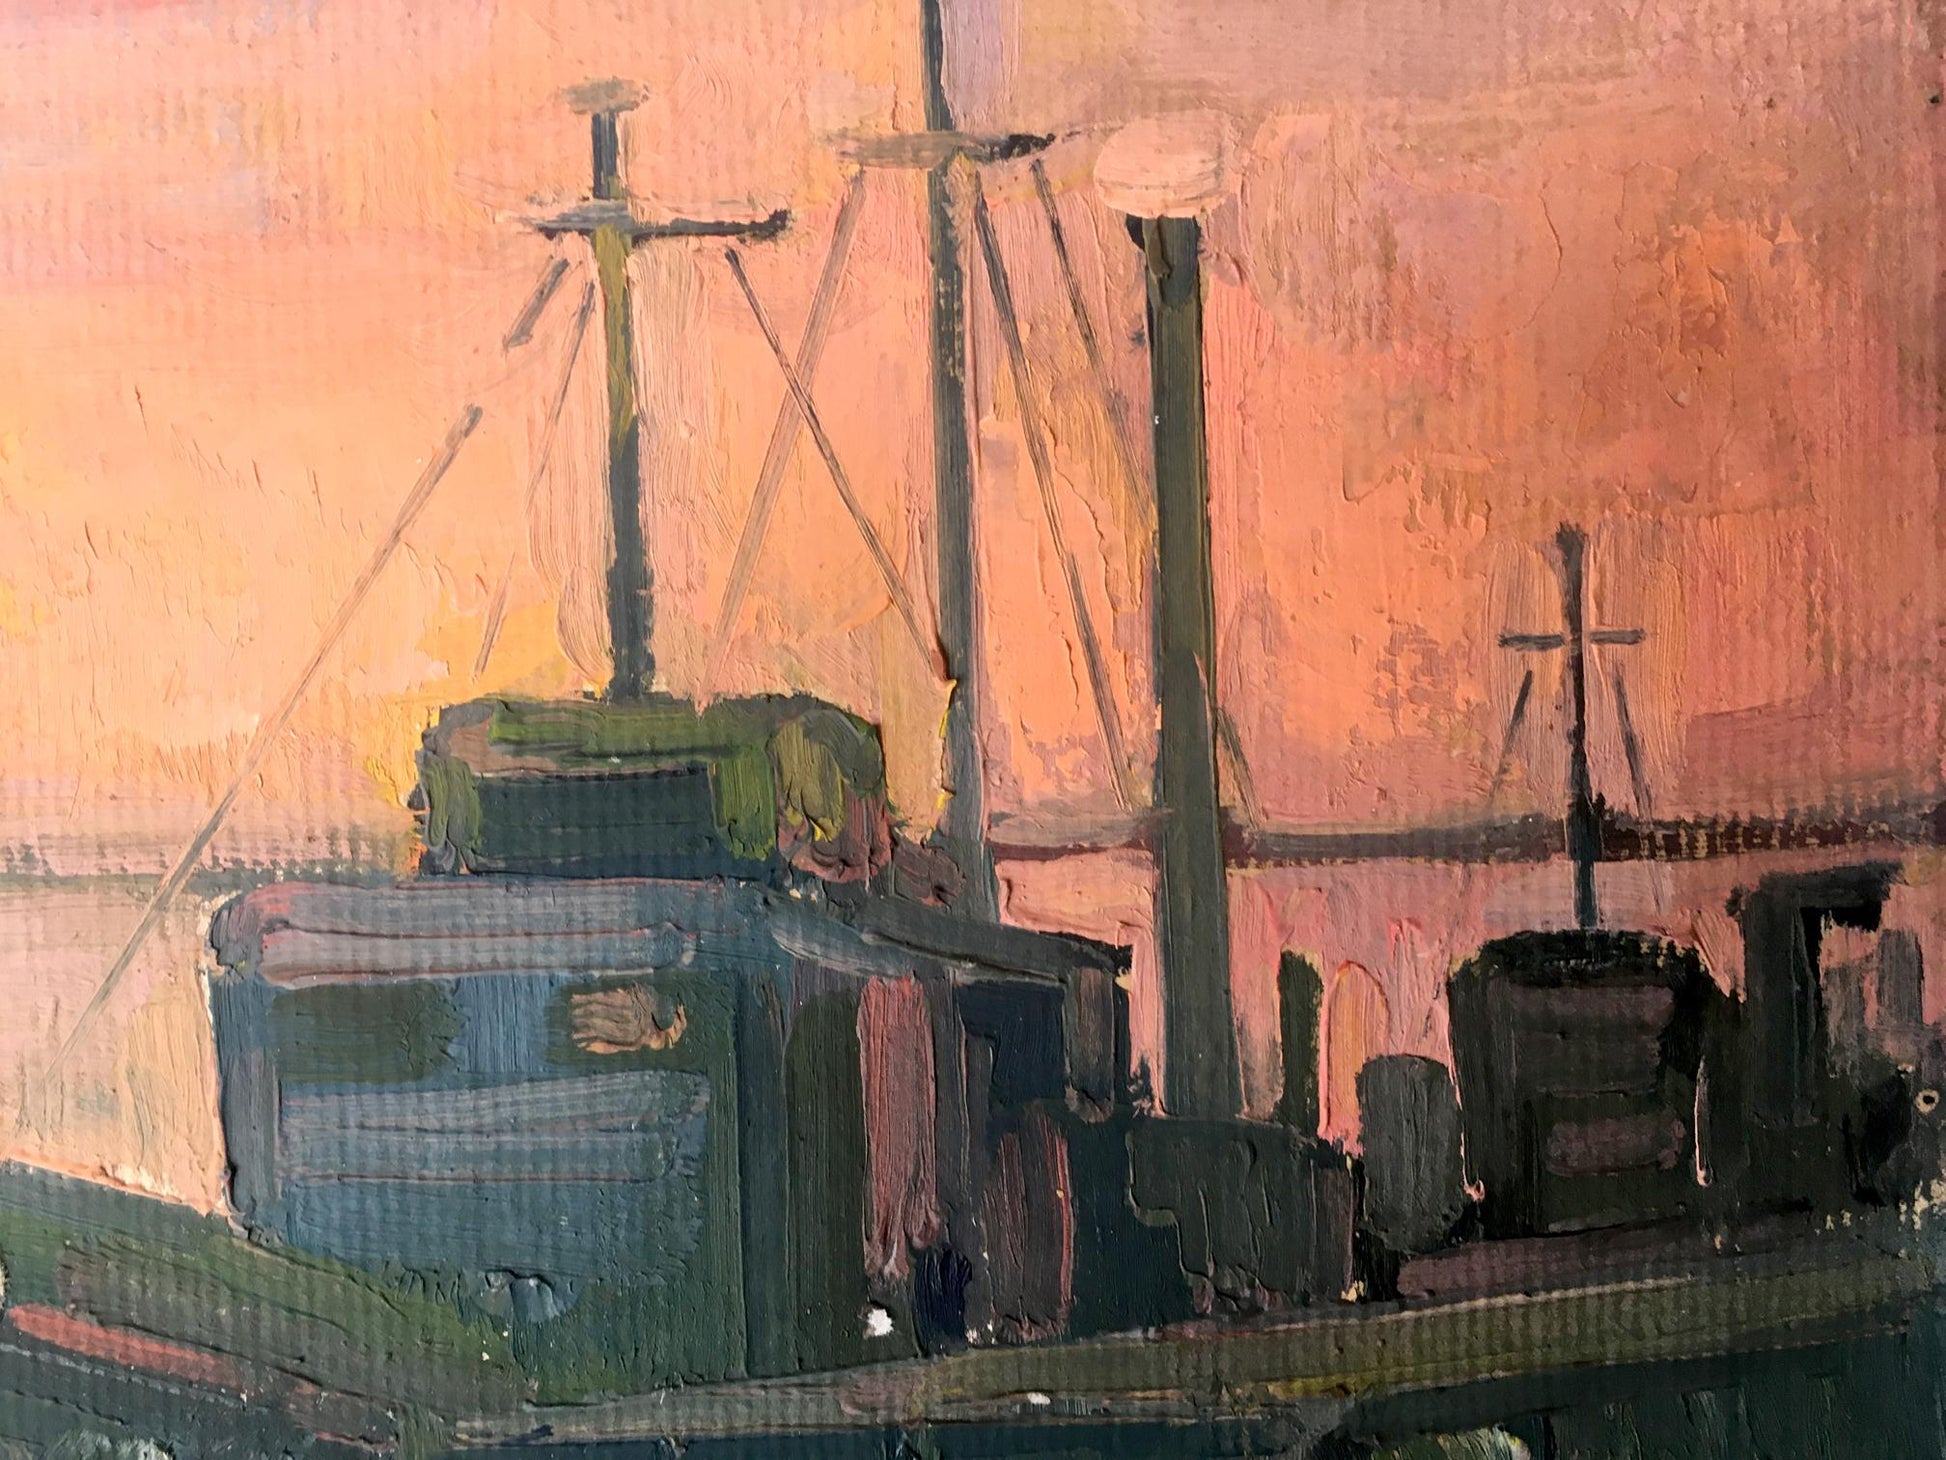 Through his oil painting, Peter Dobrev showcases the intricate details of ships docked in port